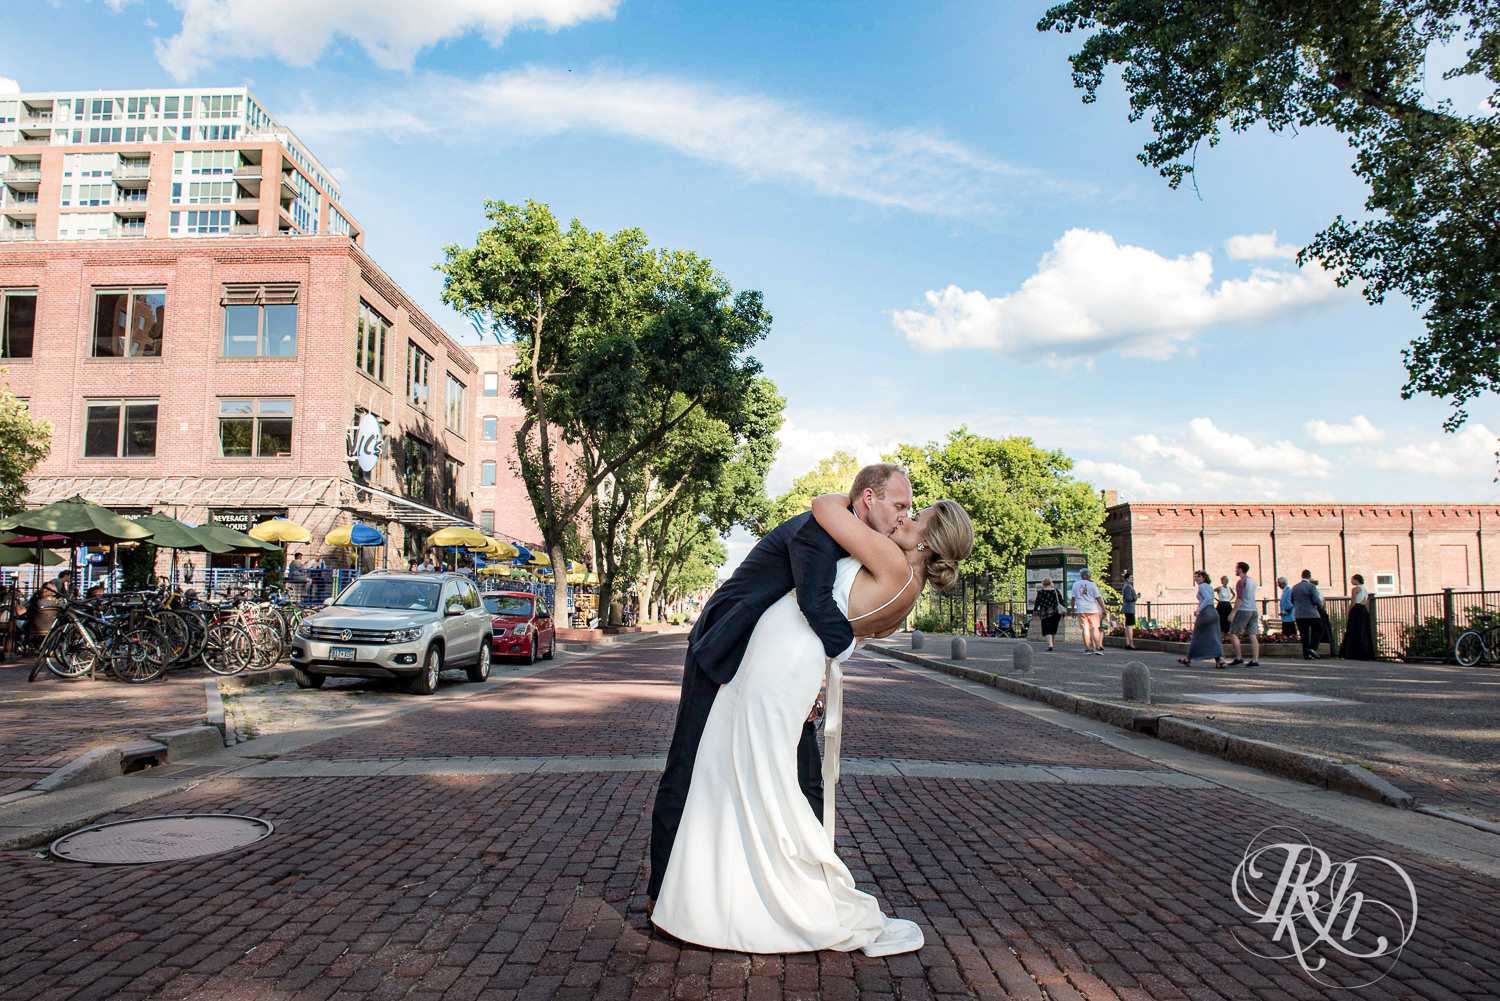 Bride and groom kiss under in the street on their wedding day in Minneapolis, Minnesota.